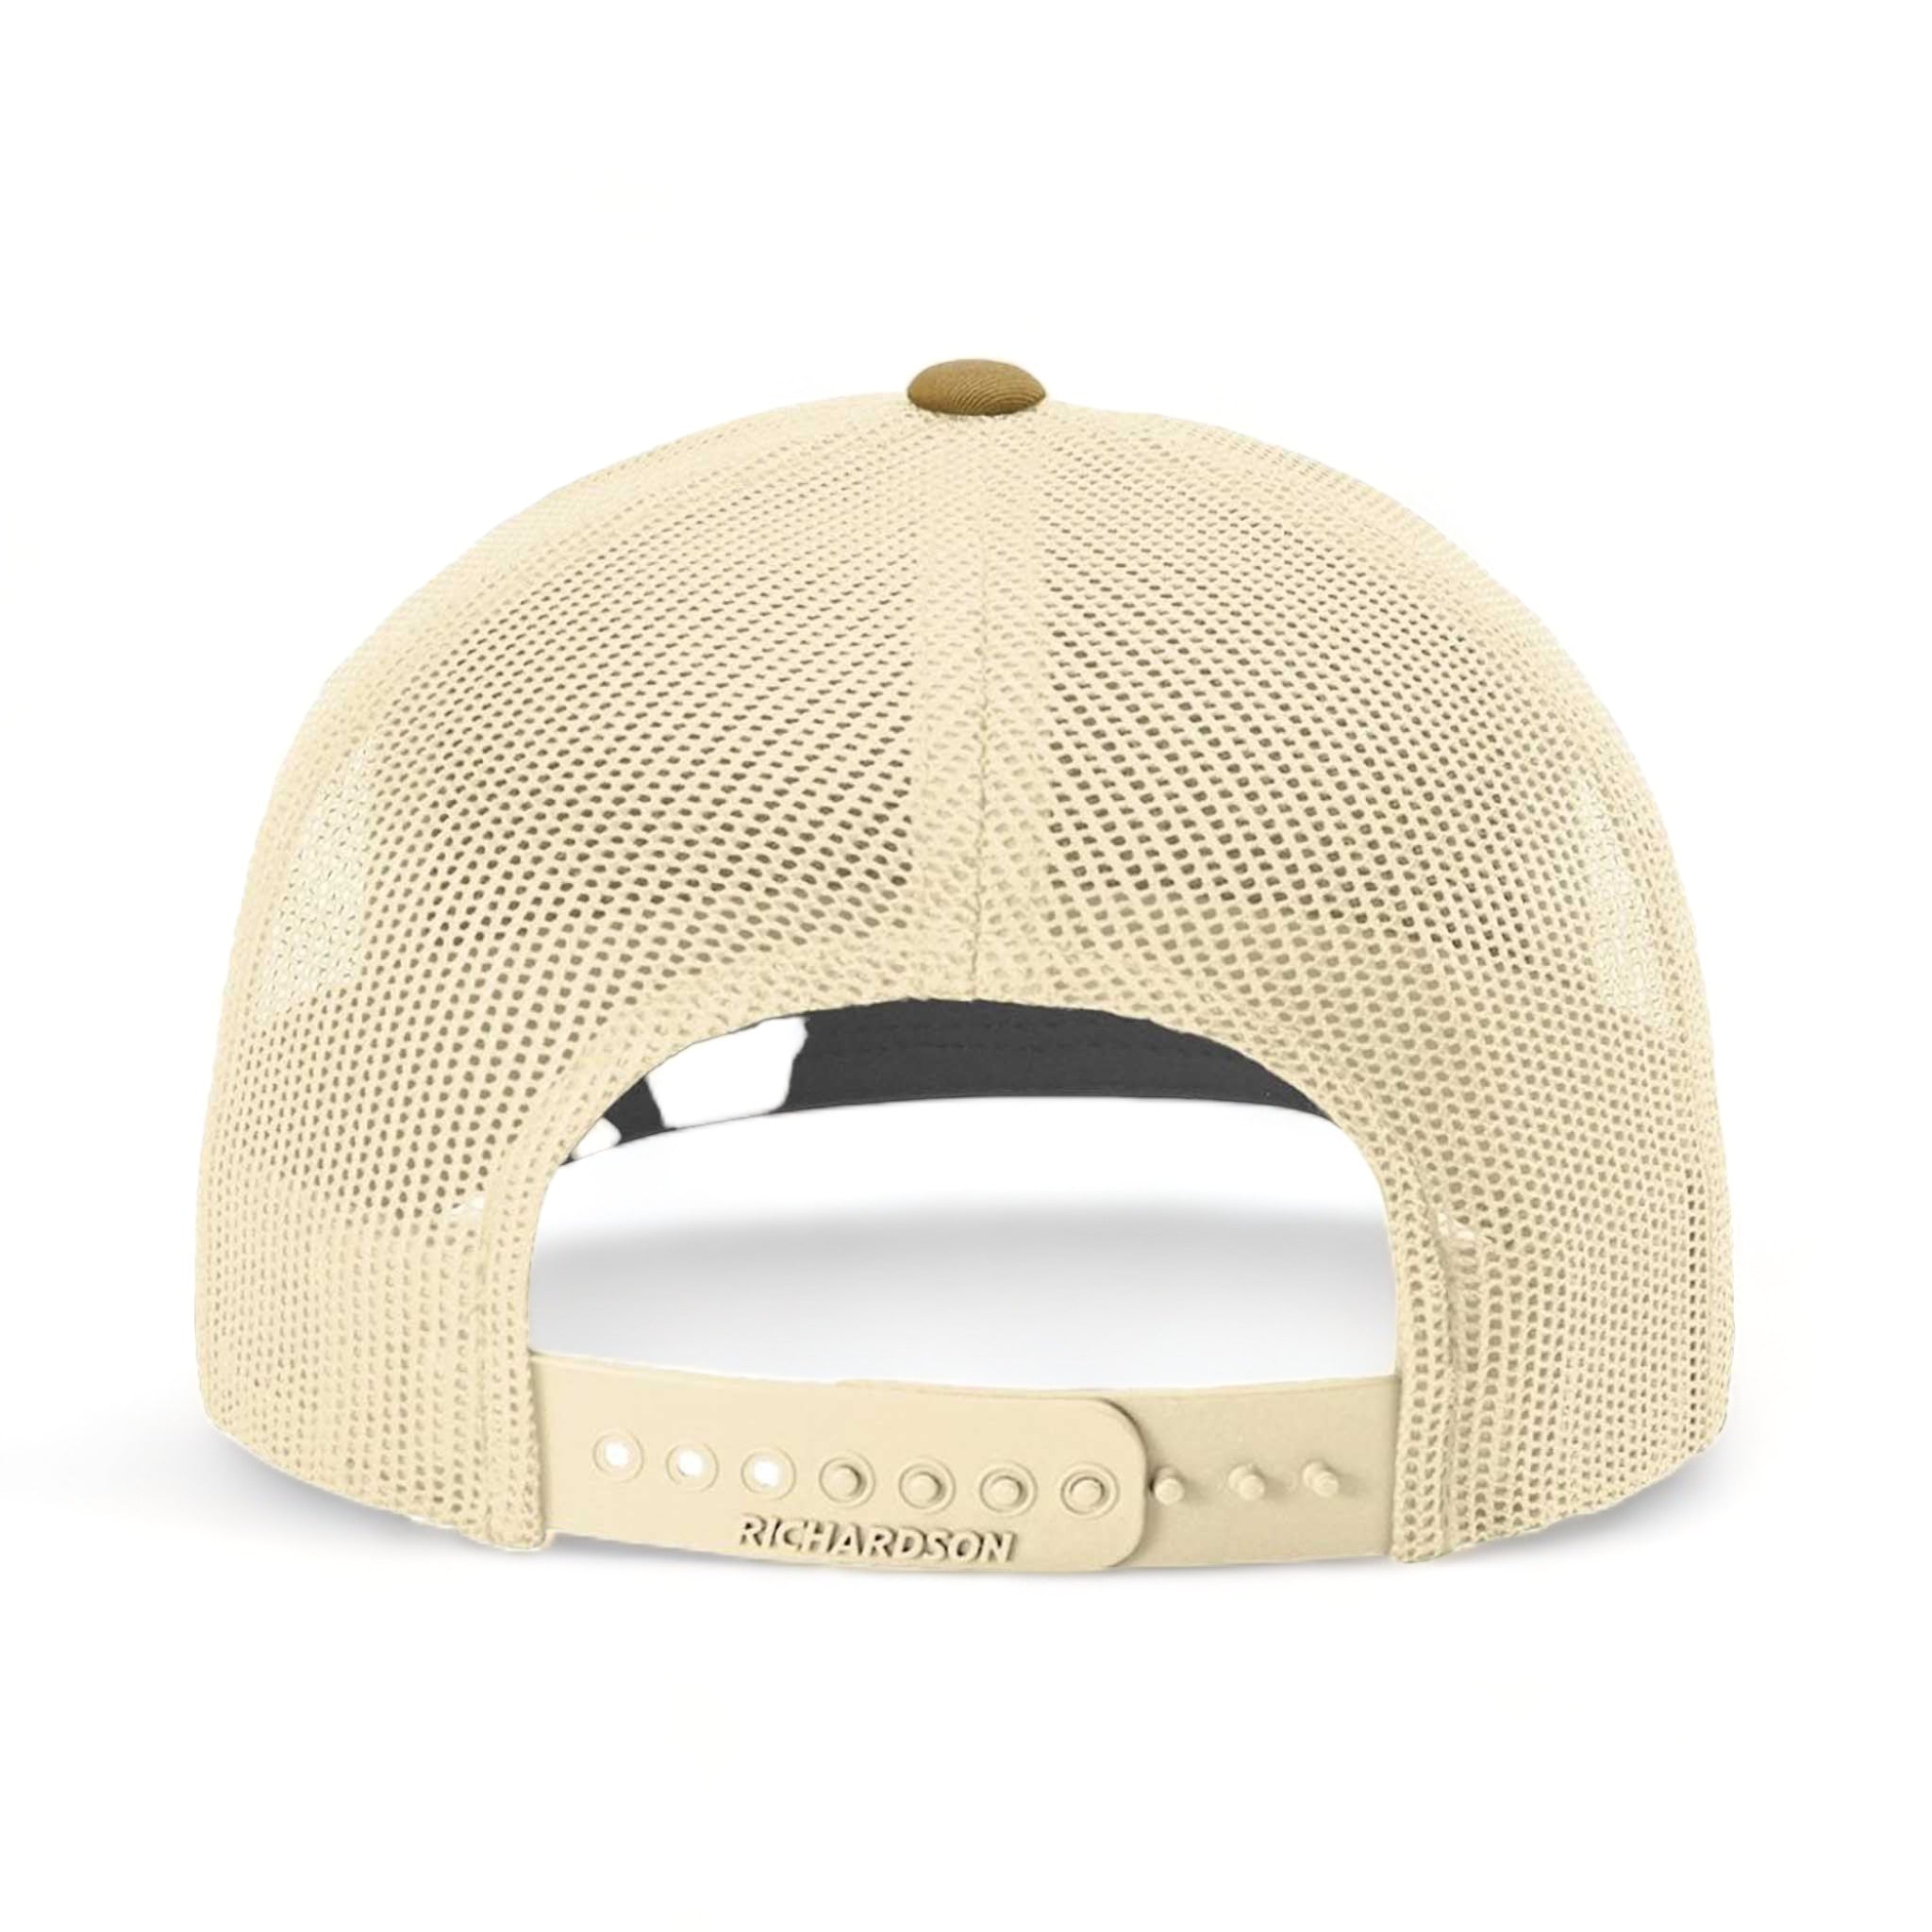 Back view of Richardson 112 custom hat in heather grey, birch and amber gold